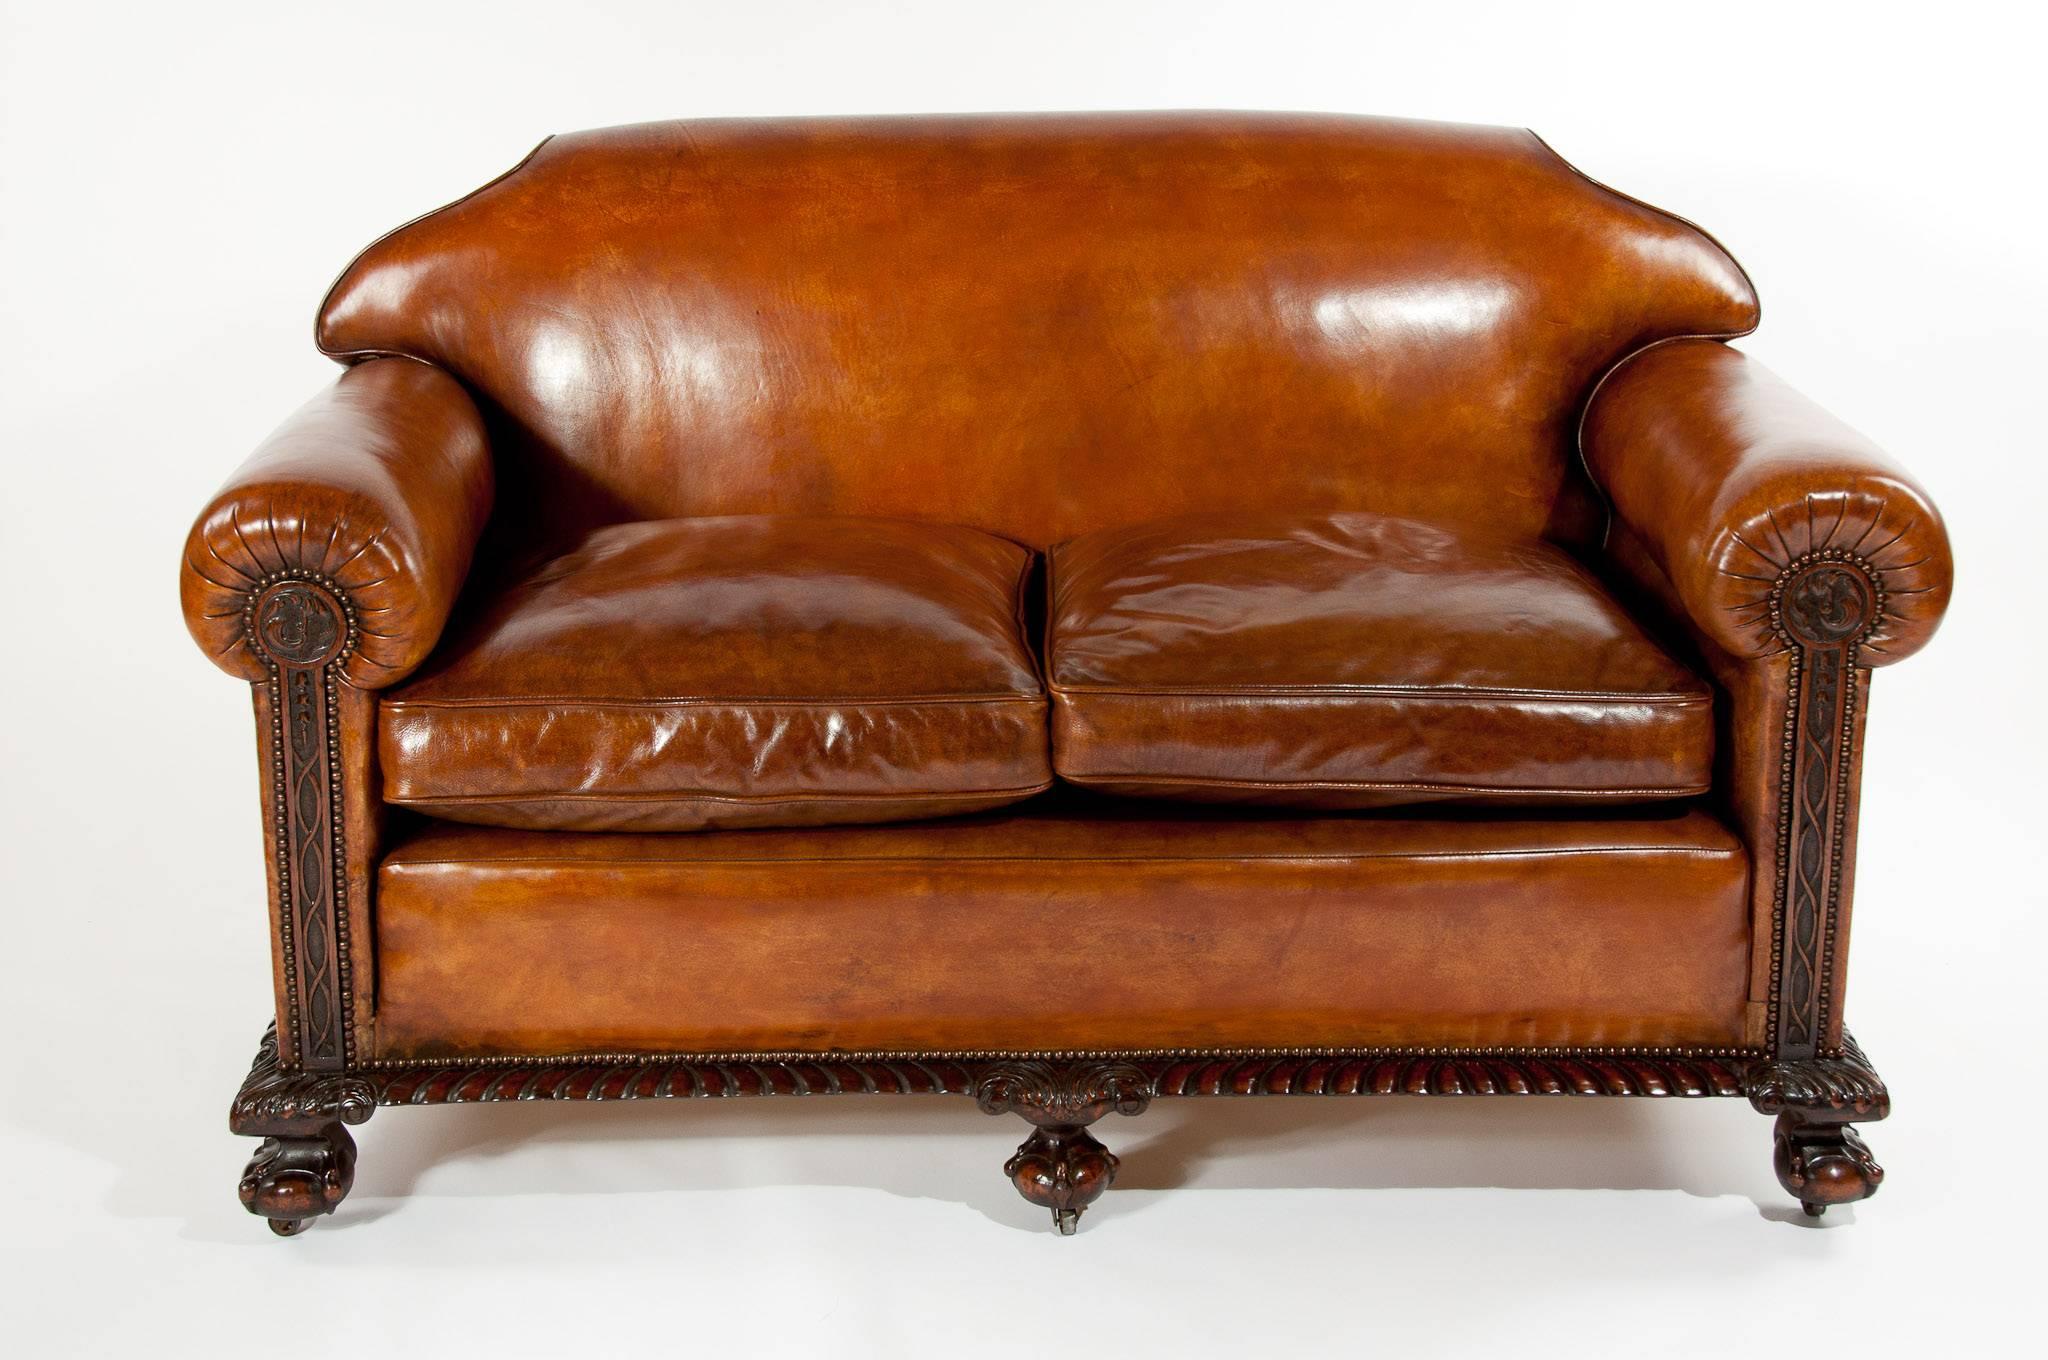 A delightful and extremely well proportioned Victorian leather upholstered mahogany sofa and armchairs, three-piece suite. The suite retains an old leather having original horsehair stuffing beneath which is still intact with feather down cushions.